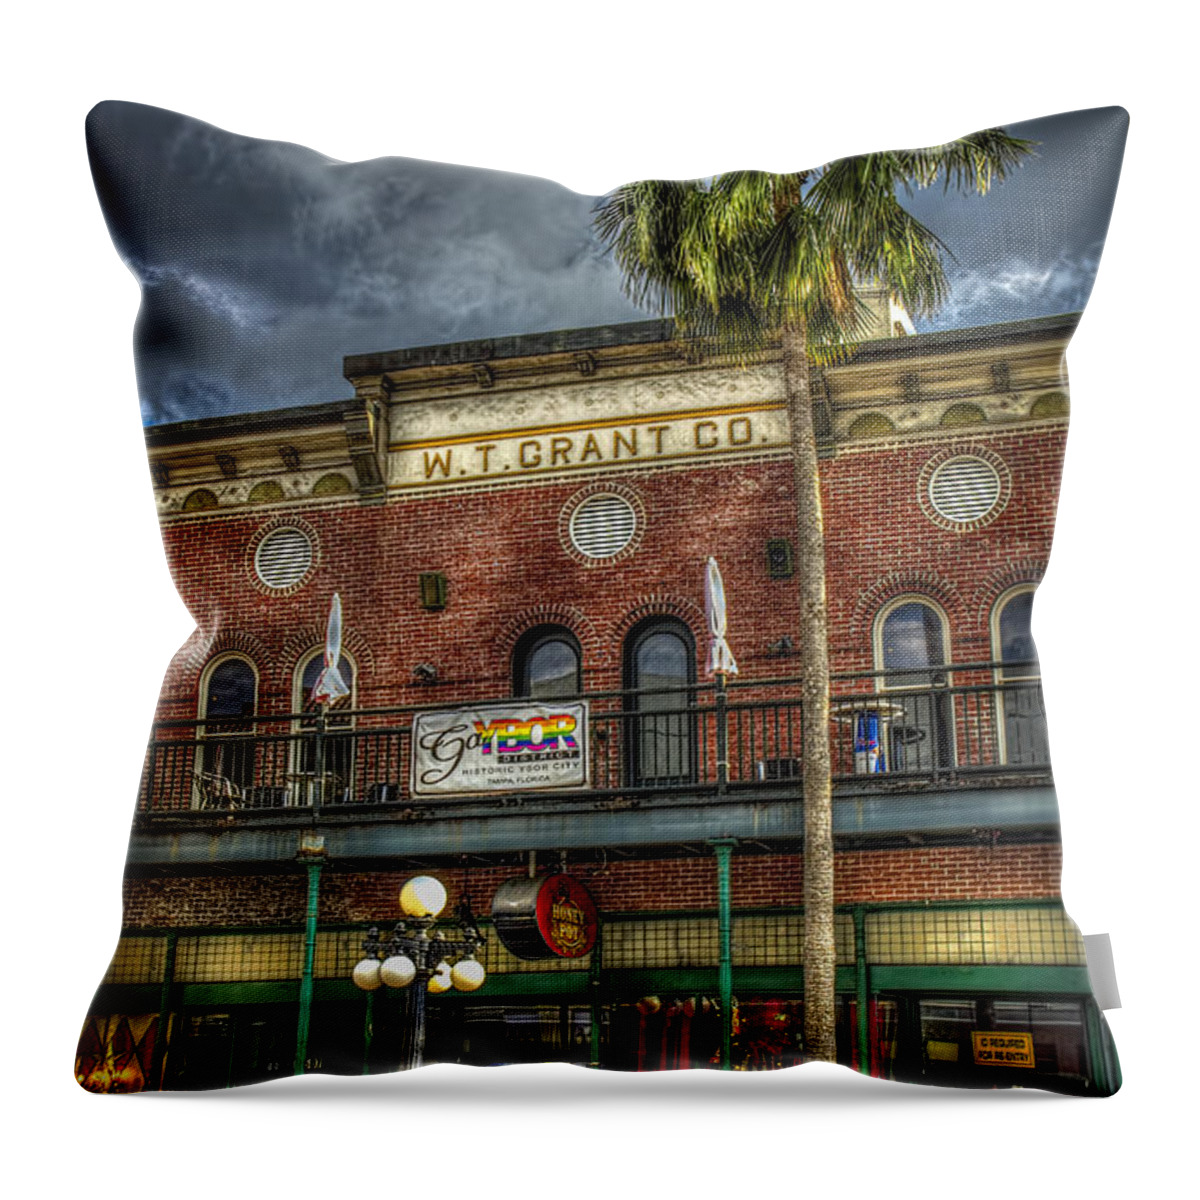 Old Building Throw Pillow featuring the photograph W. T. Grant Co. by Marvin Spates